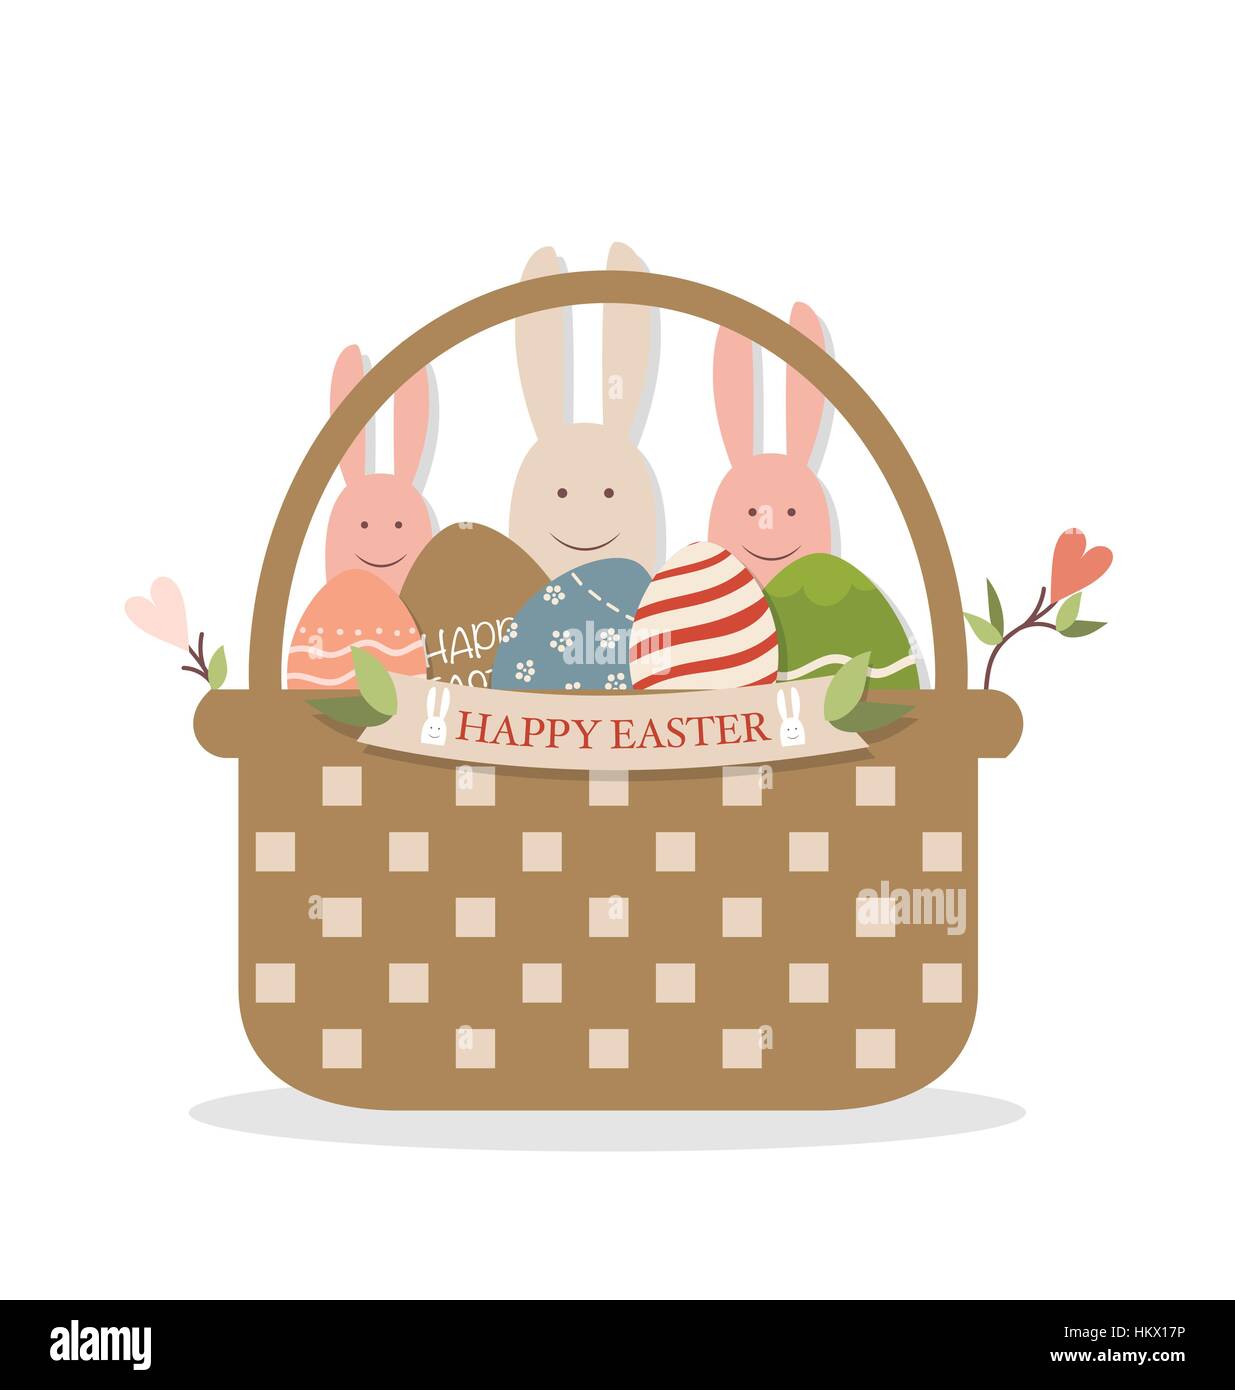 Happy easter cards with Easter bunnies and Easter eggs. Vector illustration. Stock Vector